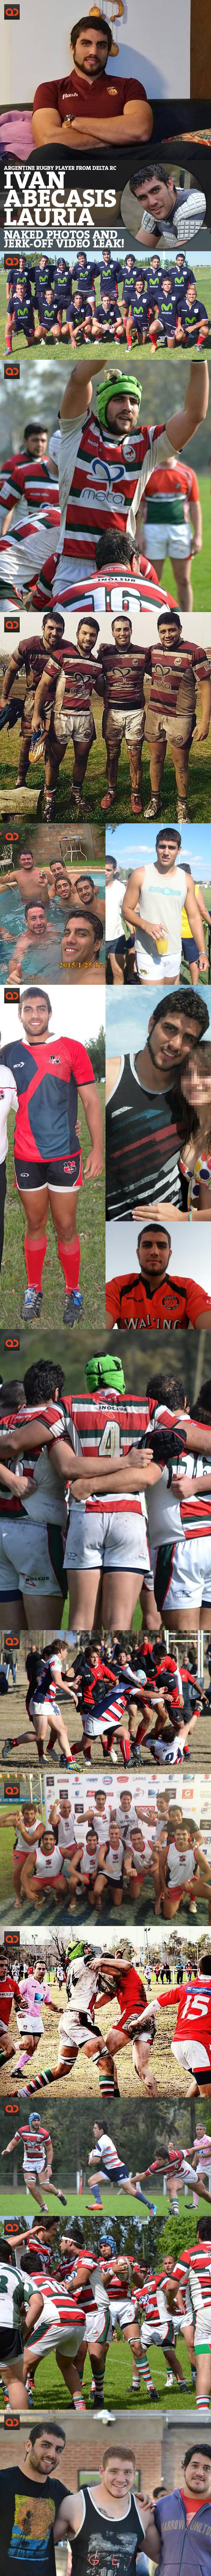 Ivan Abecasis Lauria, Argentine Rugby Player From Delta RC, Naked Photos And Jerk-Off Video Leak!